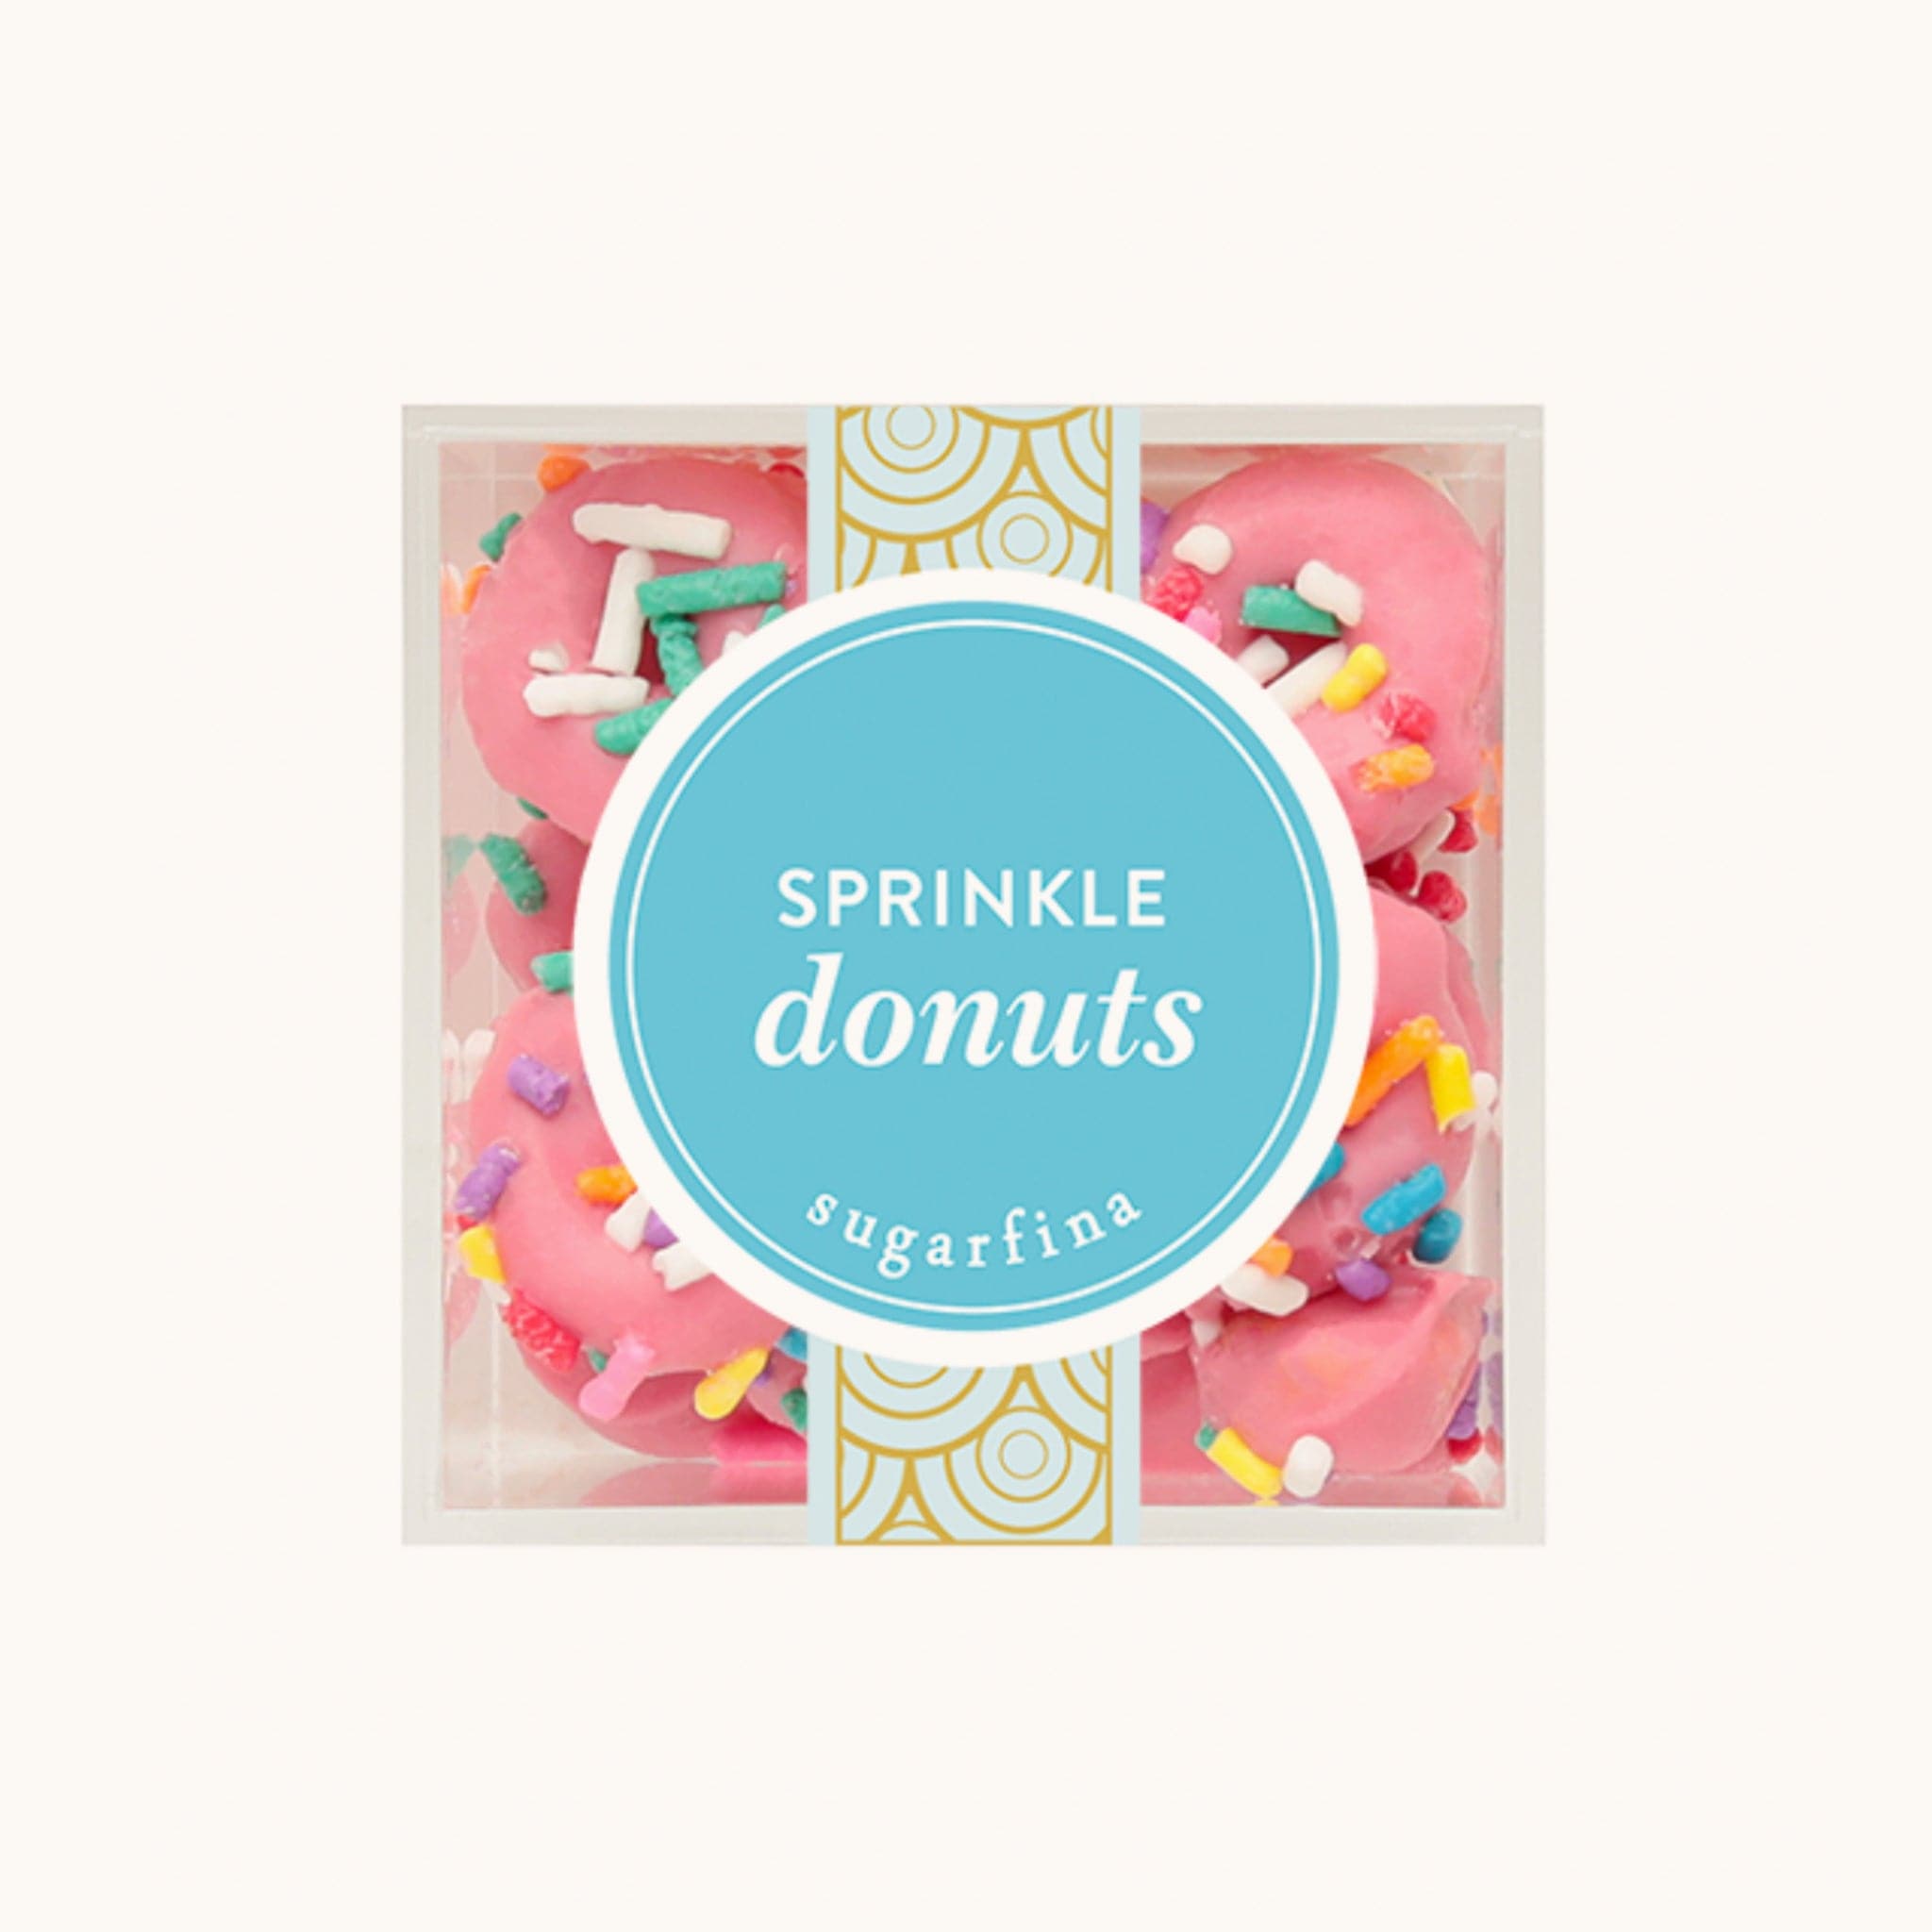 Plastic cube of miniature pink donut candies topped with colorful sprinkles. The box reads 'Sprinkle donuts' across a teal circular logo. 